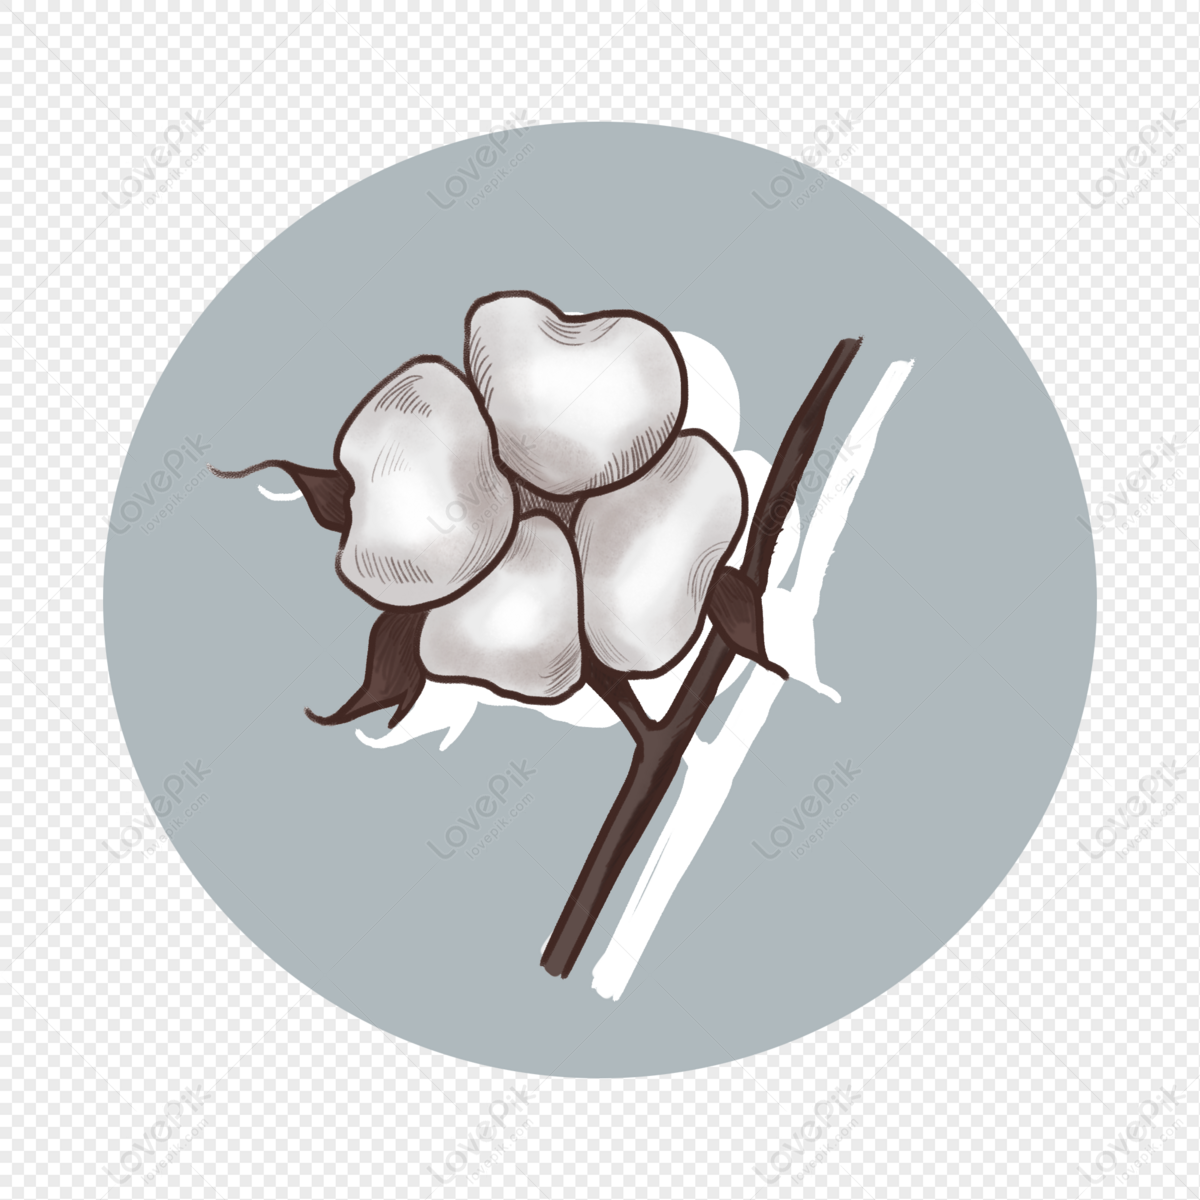 A Cotton Plant PNG Images | PSD Free Download - Pikbest